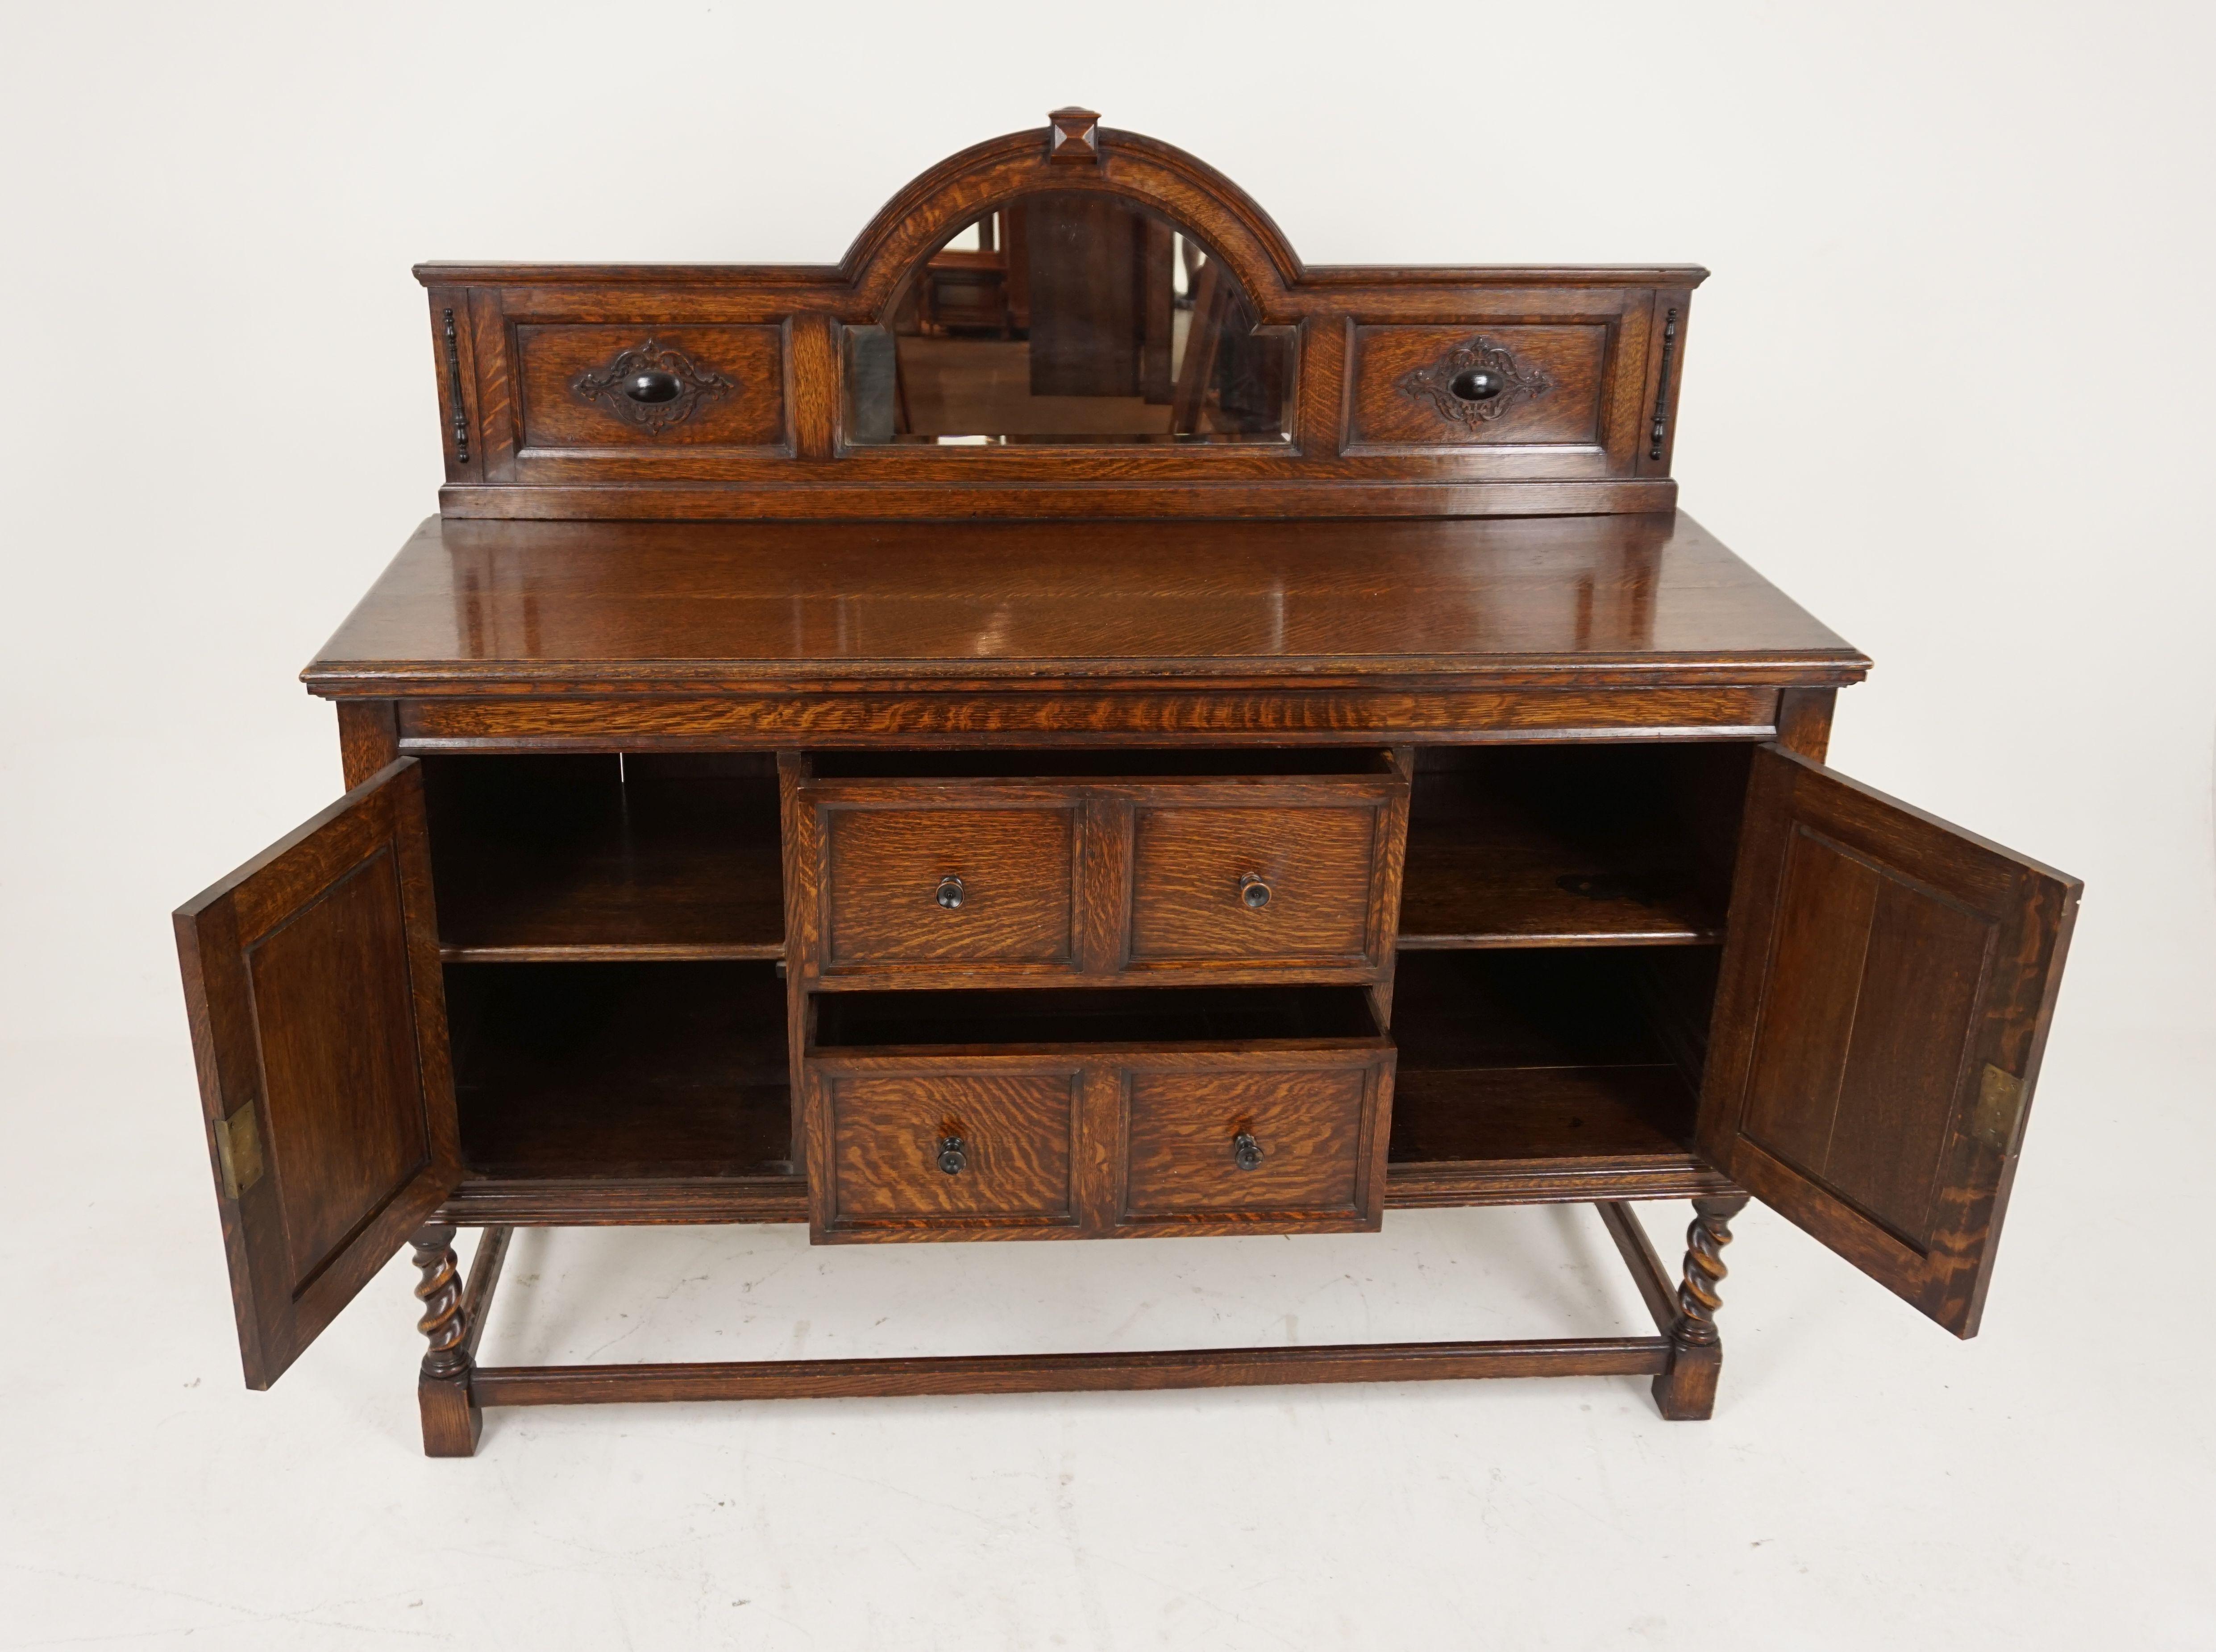 Antique tiger oak barley twist, sideboard buffet, server, Scotland 1920, B2074

Scotland, 1920
Solid oak
Original finish
Upper section has a shaped beveled mirror with a pair of carved paneled sides
Pair of paneled drawers to the